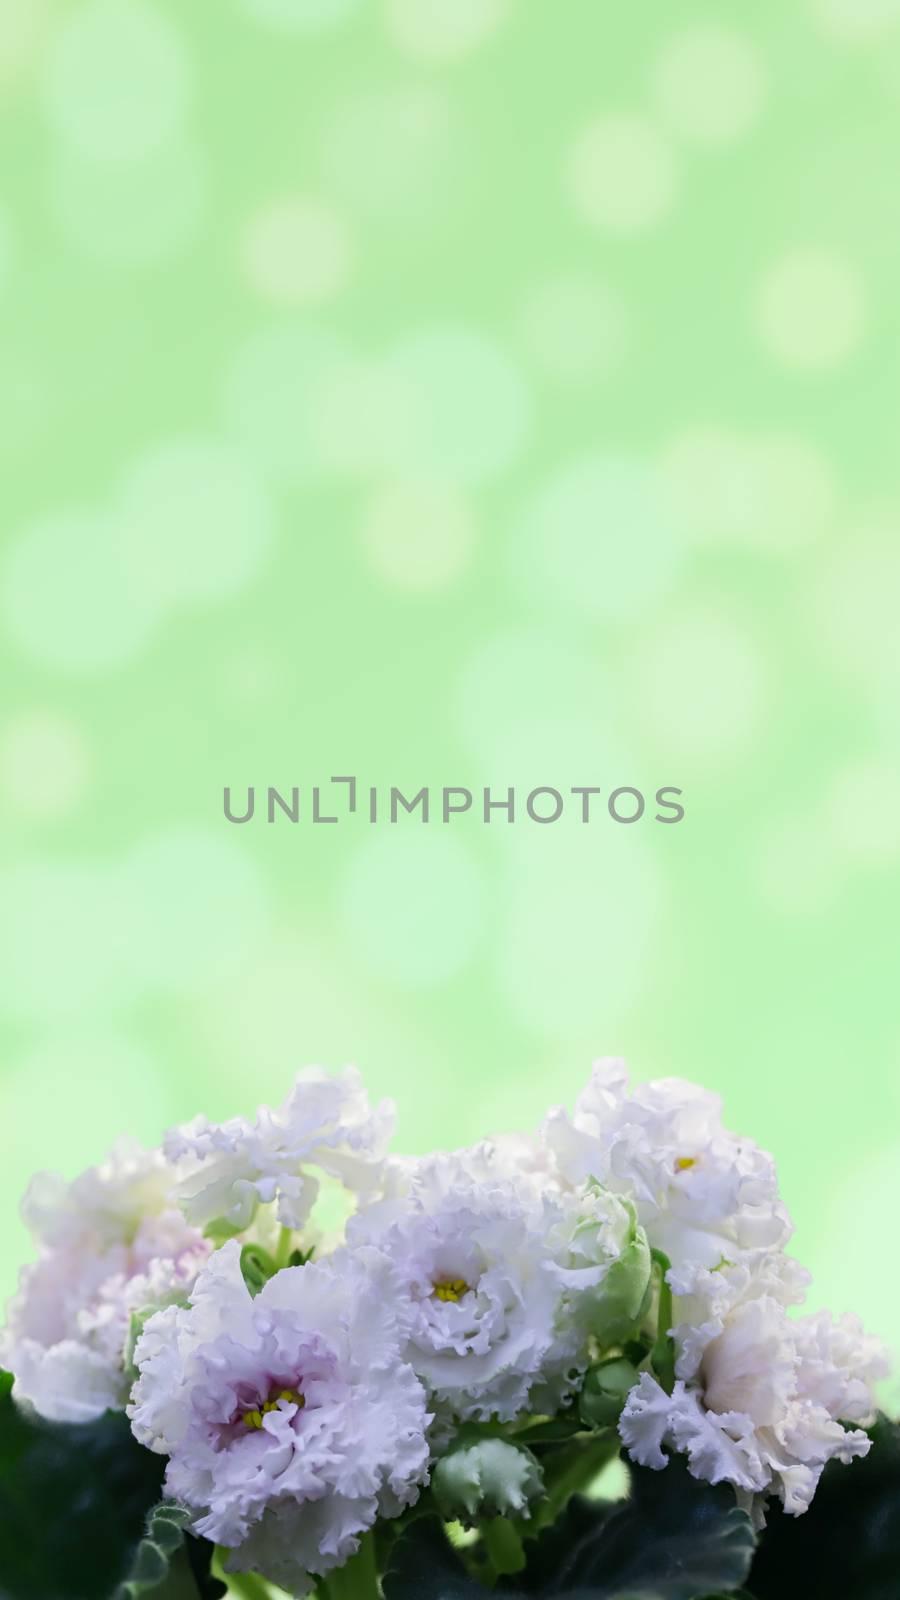 Spring flowers. Tender white terry violets on a blurred green background. Free space for your text.